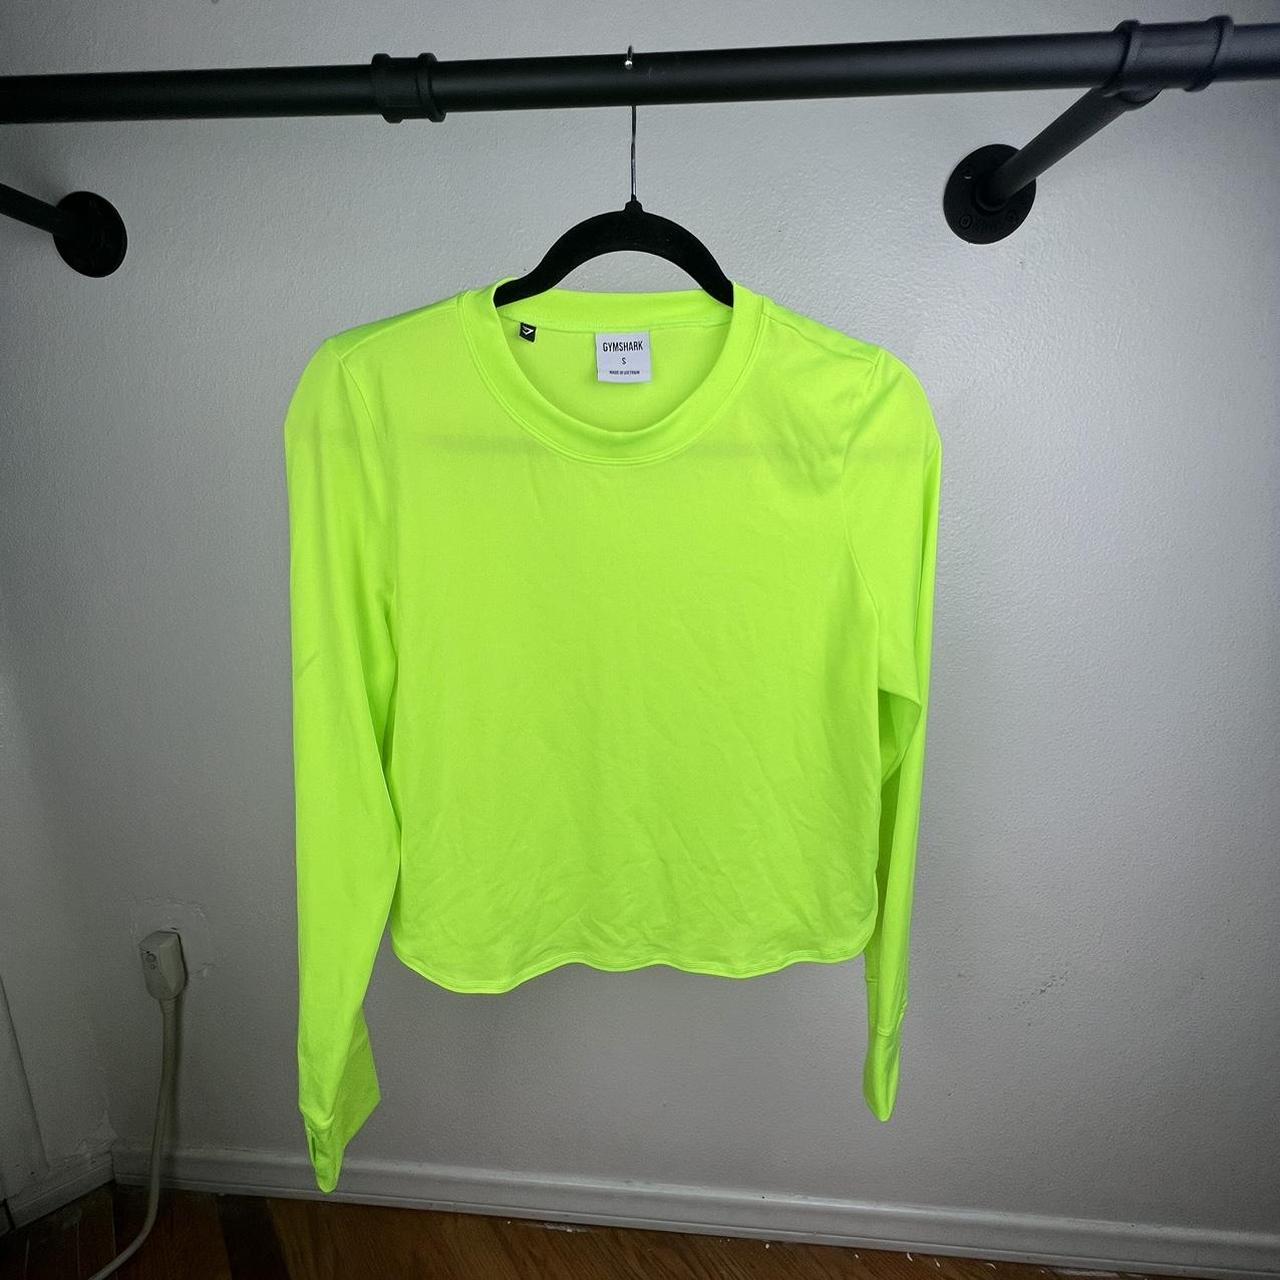 gymshark long line top for modesty has thumb holes - Depop